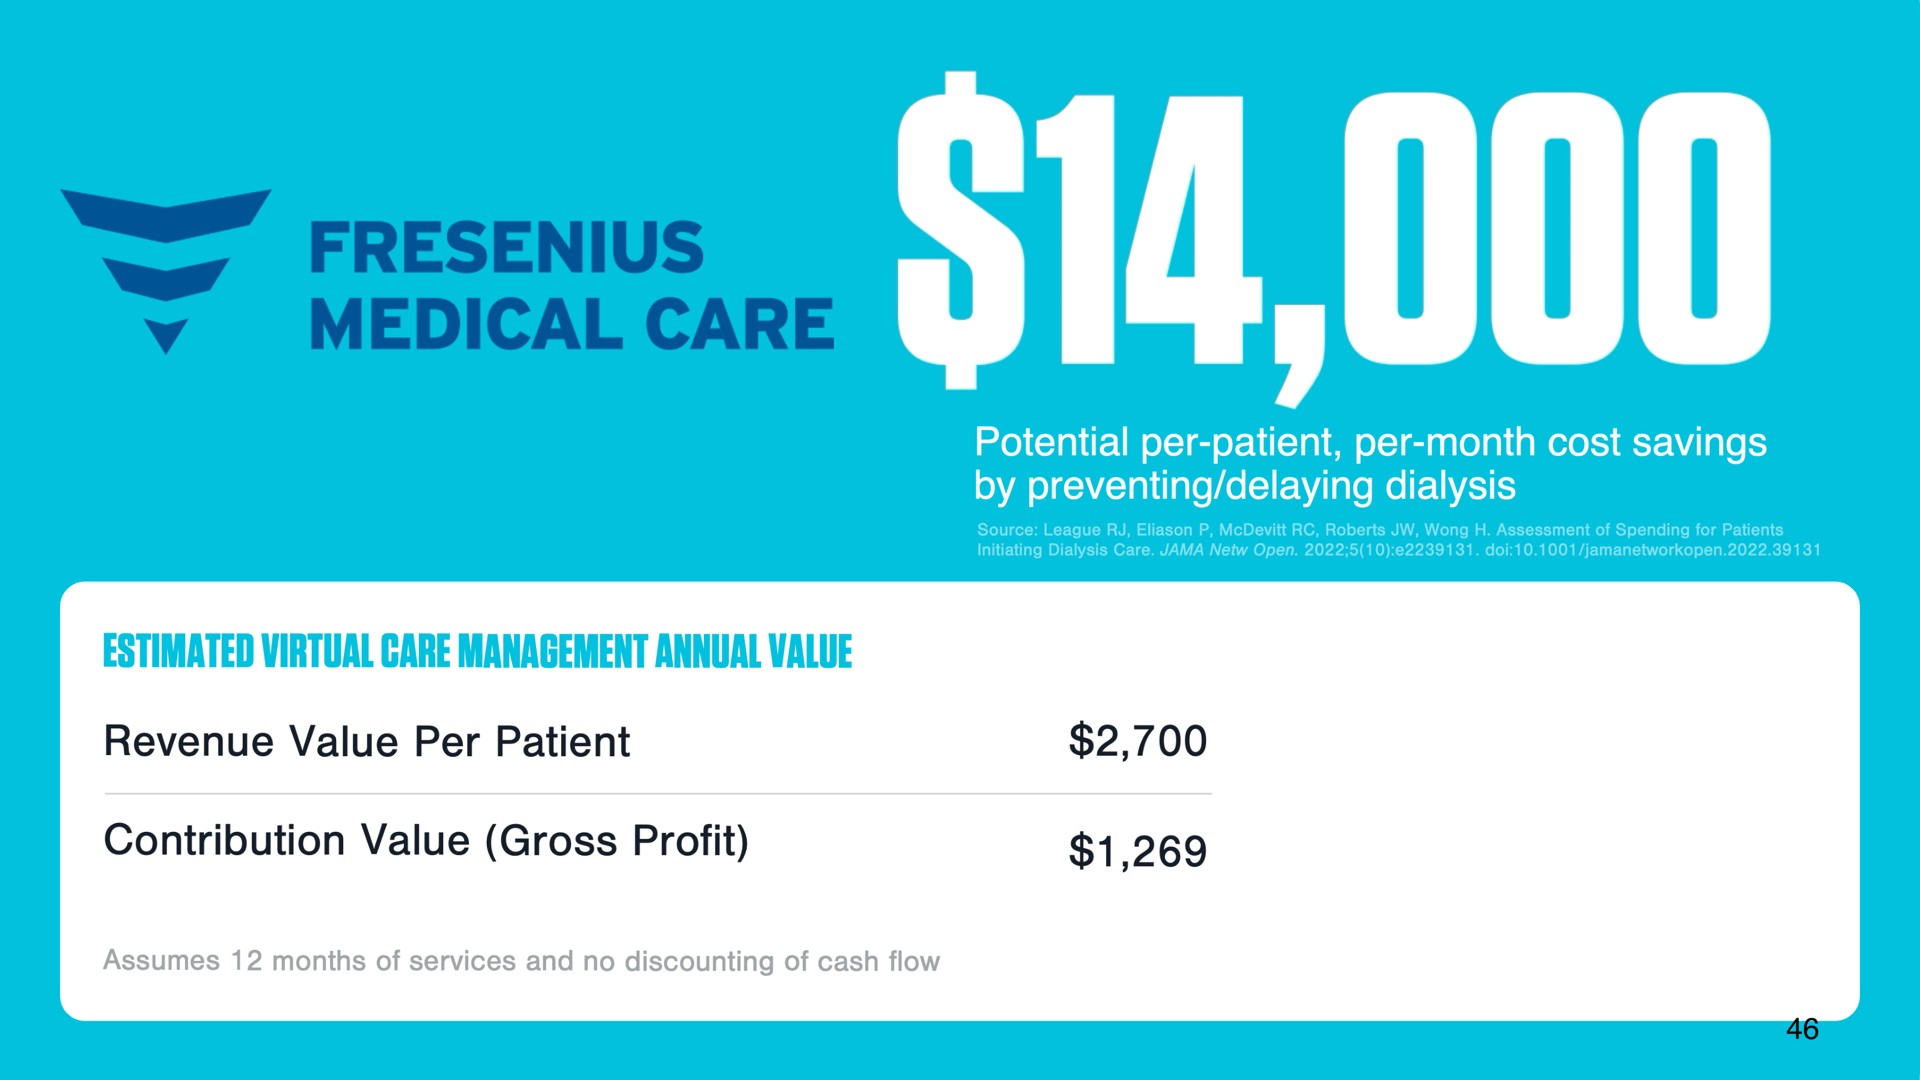 suit by preventing delaying dialysis estimated virtual gare management annual value contribution value gross profit | DocGo